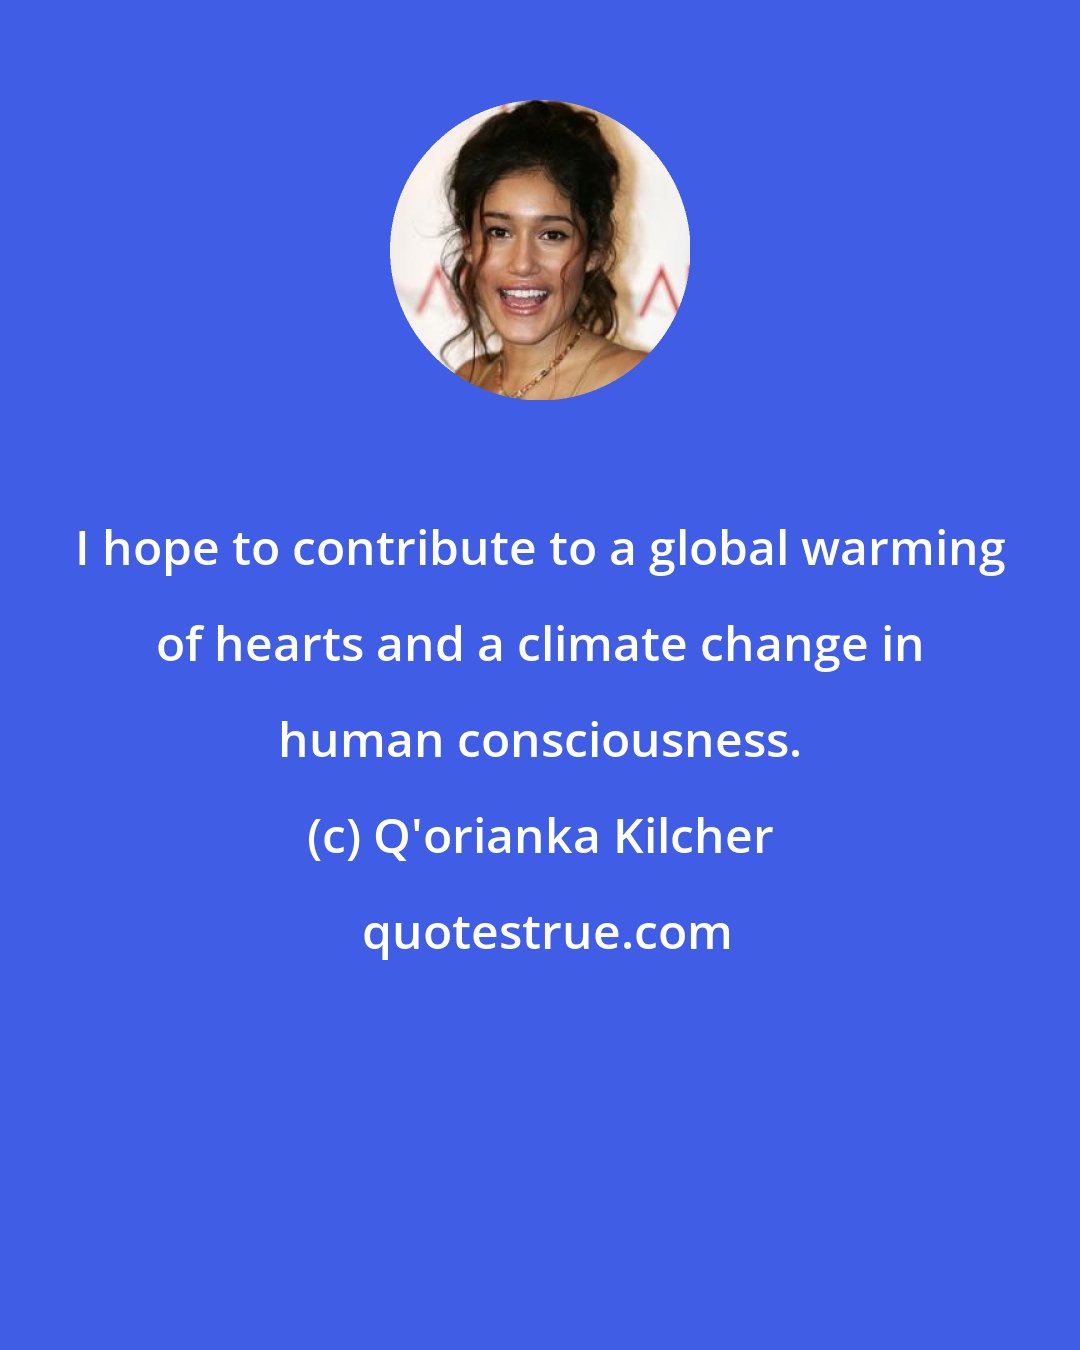 Q'orianka Kilcher: I hope to contribute to a global warming of hearts and a climate change in human consciousness.